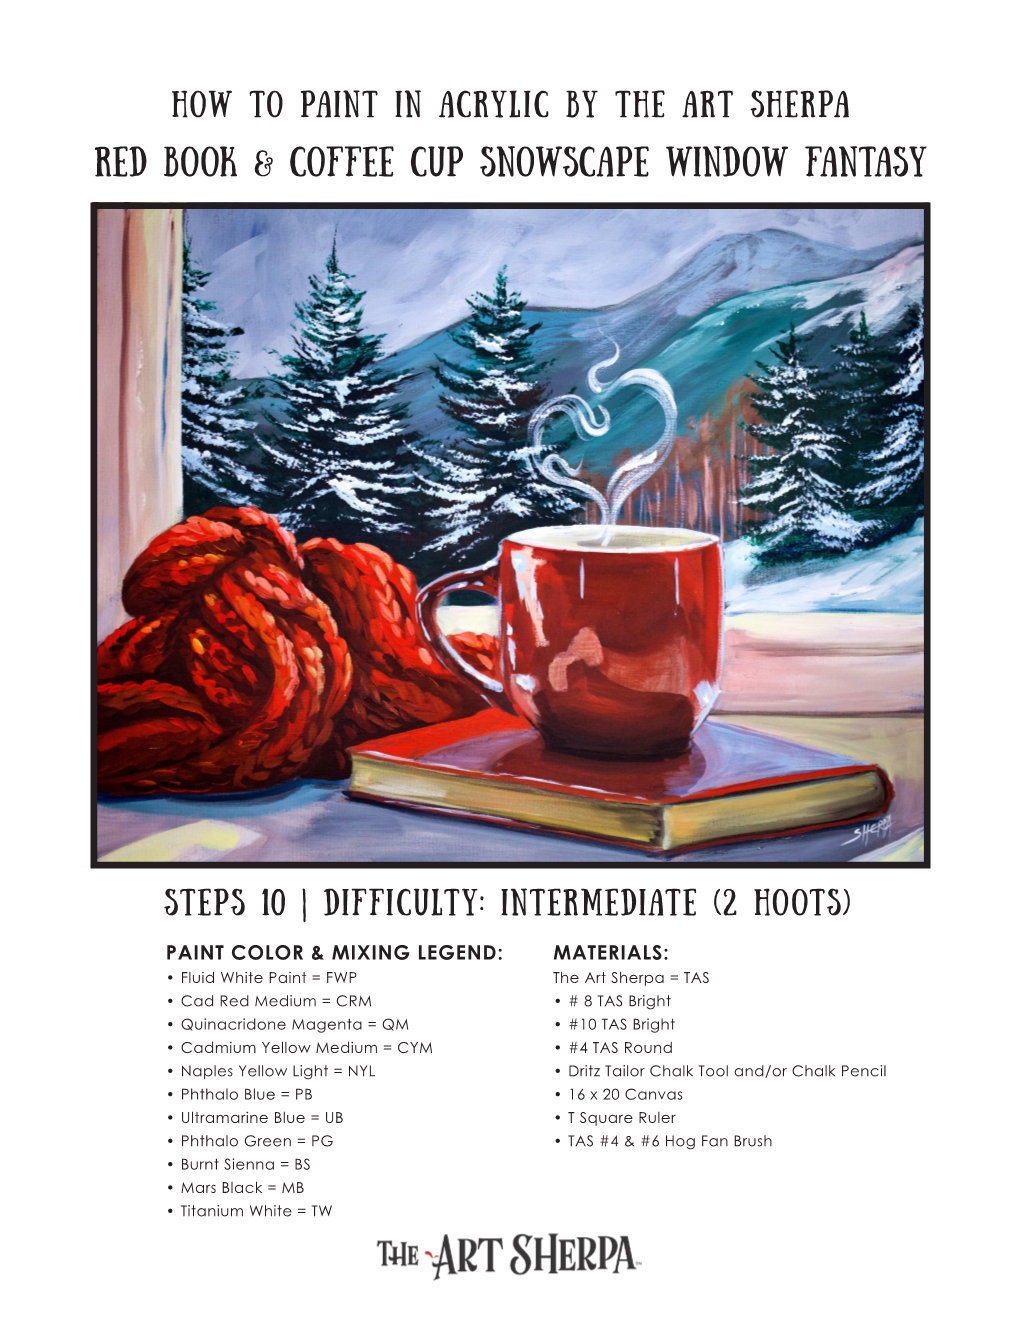 Red Book & Coffee Cup Snowscape Window Fantasy